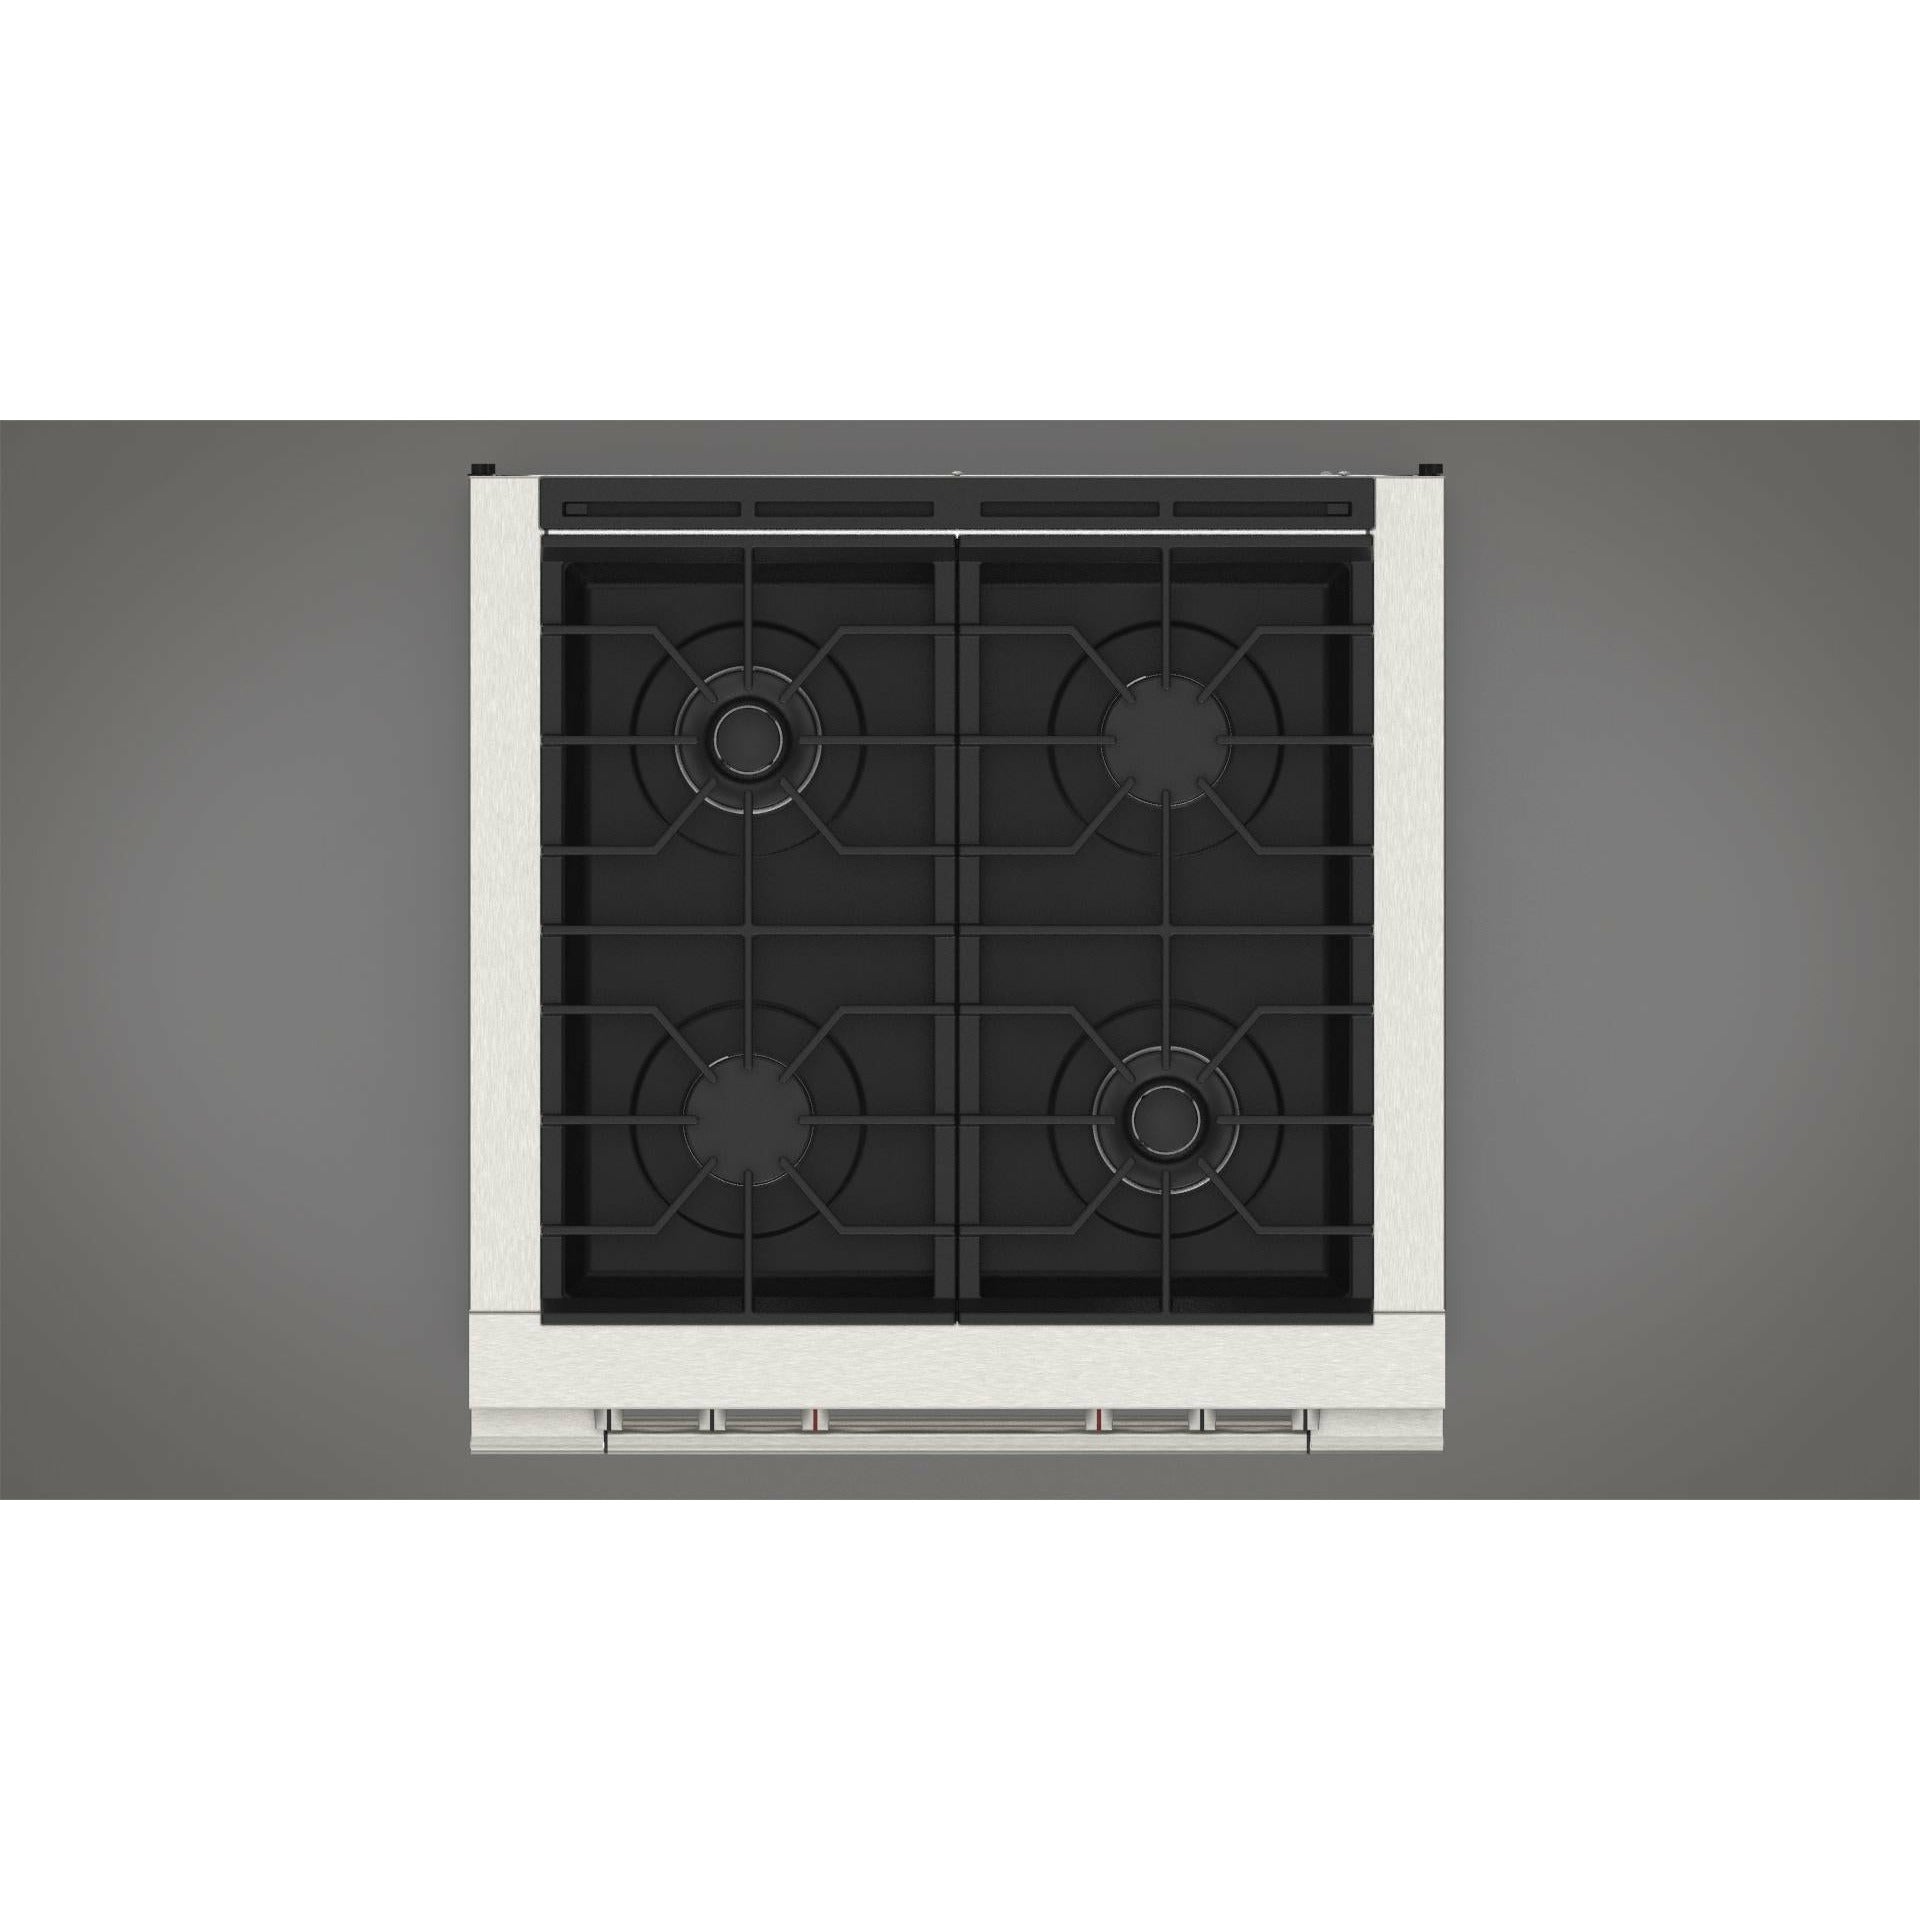 Fulgor Milano 30" Pro-Style Dual Fuel Range with 4 Sealed Burners,  4.4 Cu. Ft. Capacity w/  Stainless Steel - F4PDF304S1